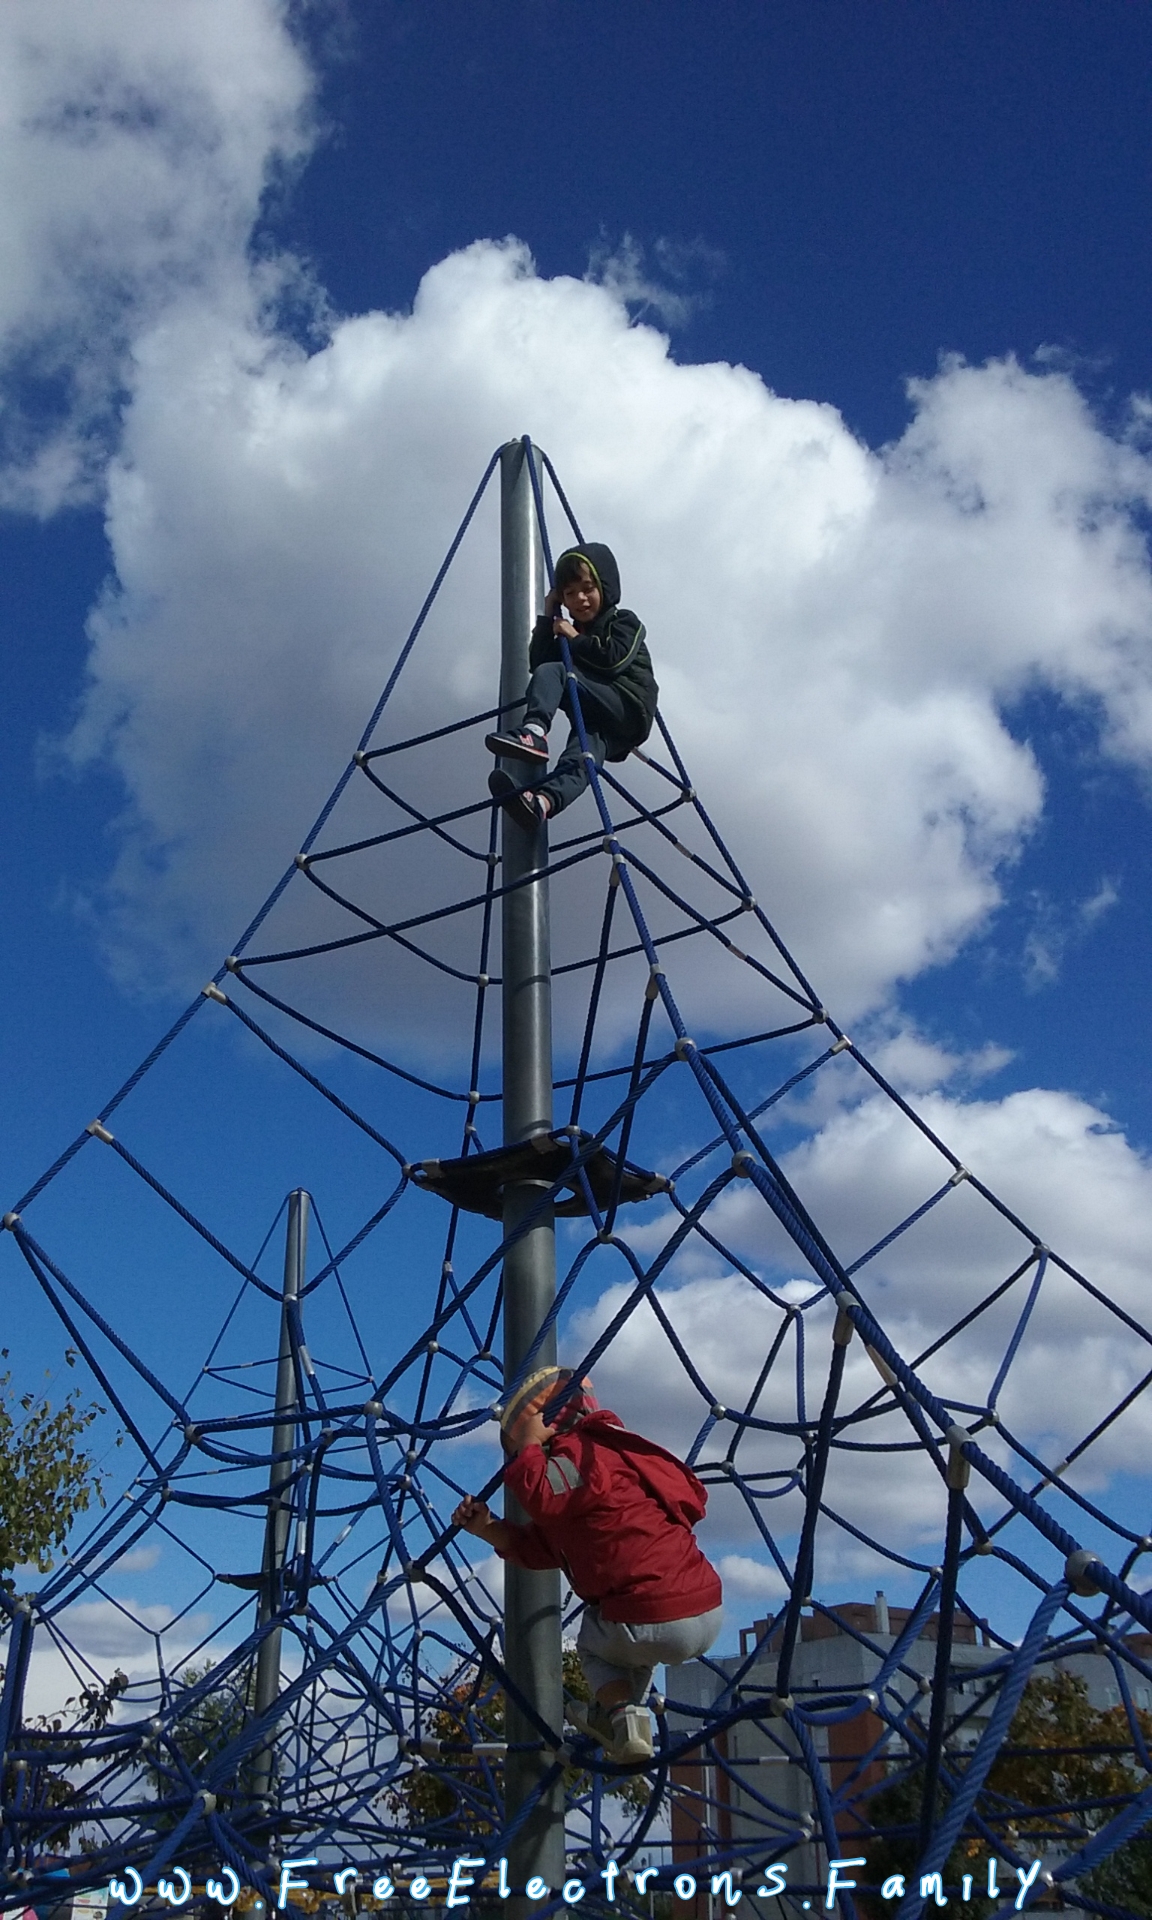 Two young children at free play, climbing a tower connected with web-like ropes, at "Ciudad de los Ninos"  (City of Children).  Background Andalucian blue sky with some cumulus clouds.